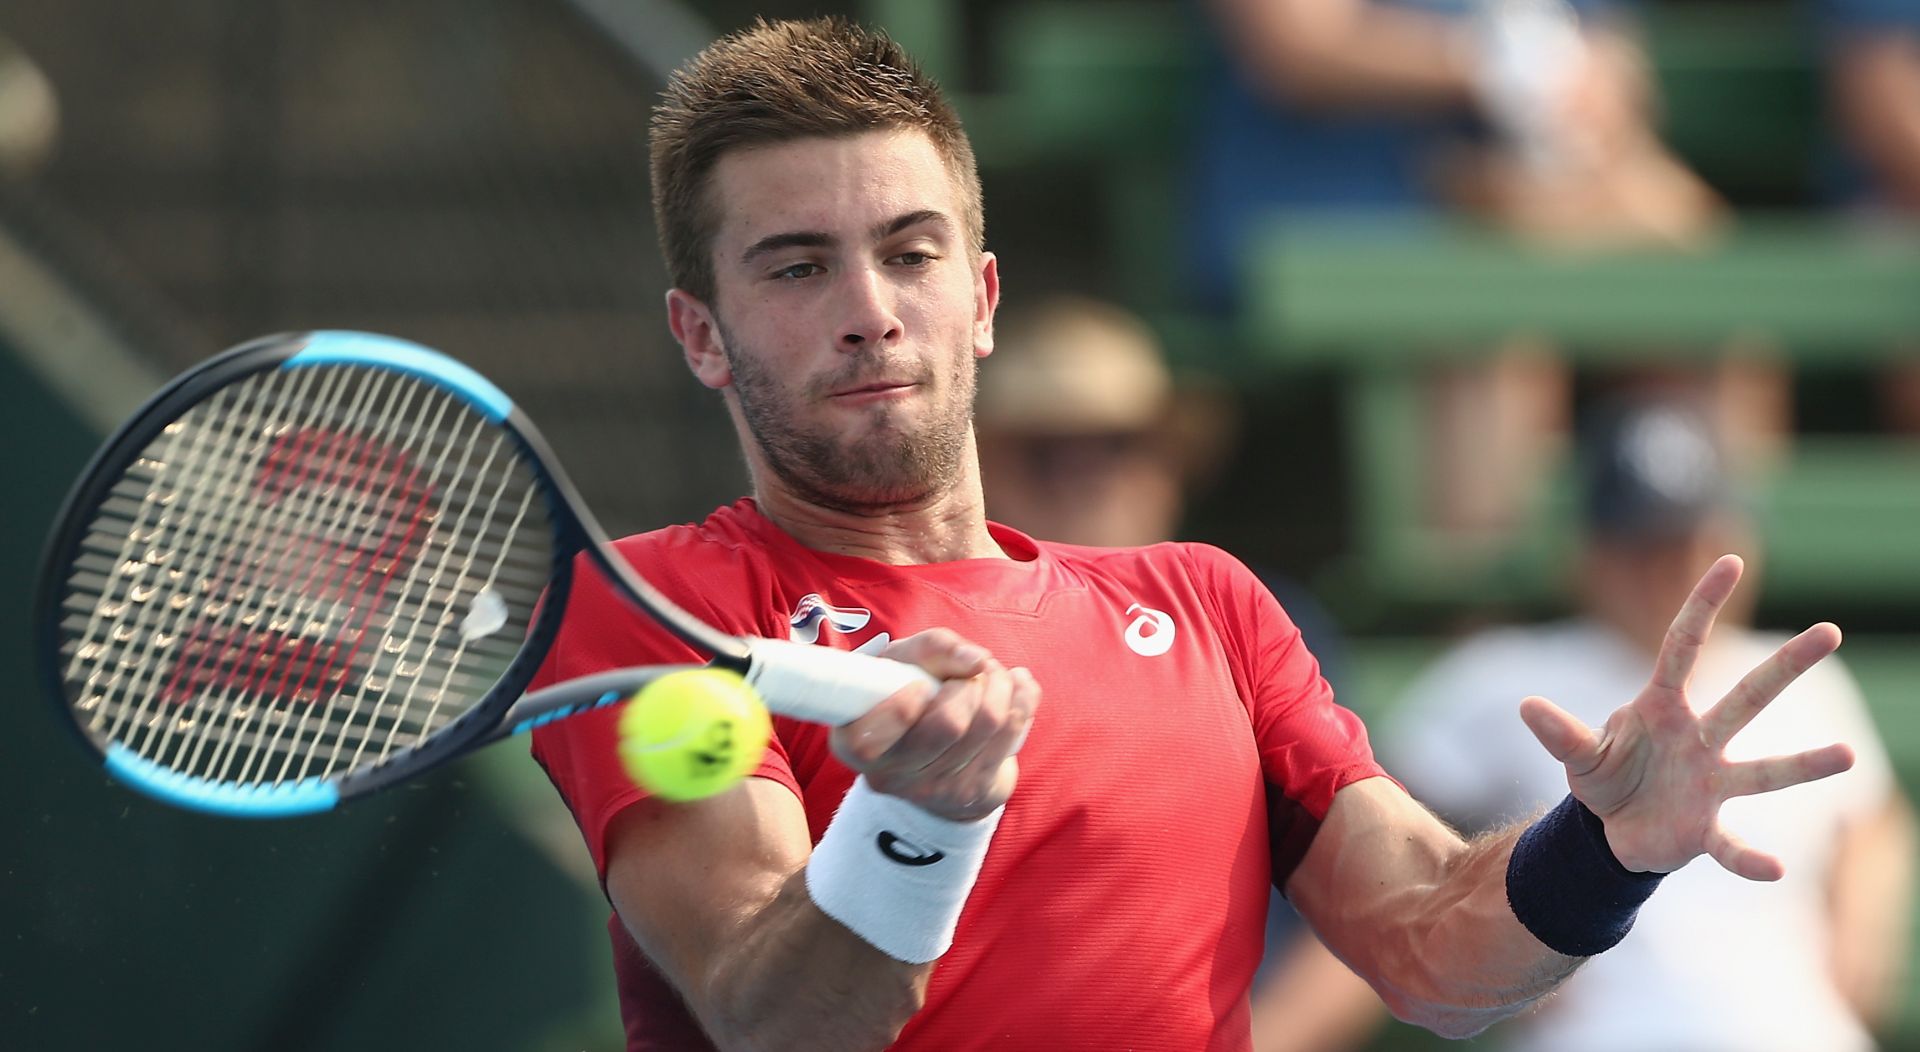 epa08126362 Borna Coric of Croatia in action against Grigor Dimitrov of Bulgaria during the Kooyong Classic at Kooyong Lawn Tennis Club in Melbourne, Australia, 14 January 2020.  EPA/ROB PREZIOSO AUSTRALIA AND NEW ZEALAND OUT  EDITORIAL USE ONLY